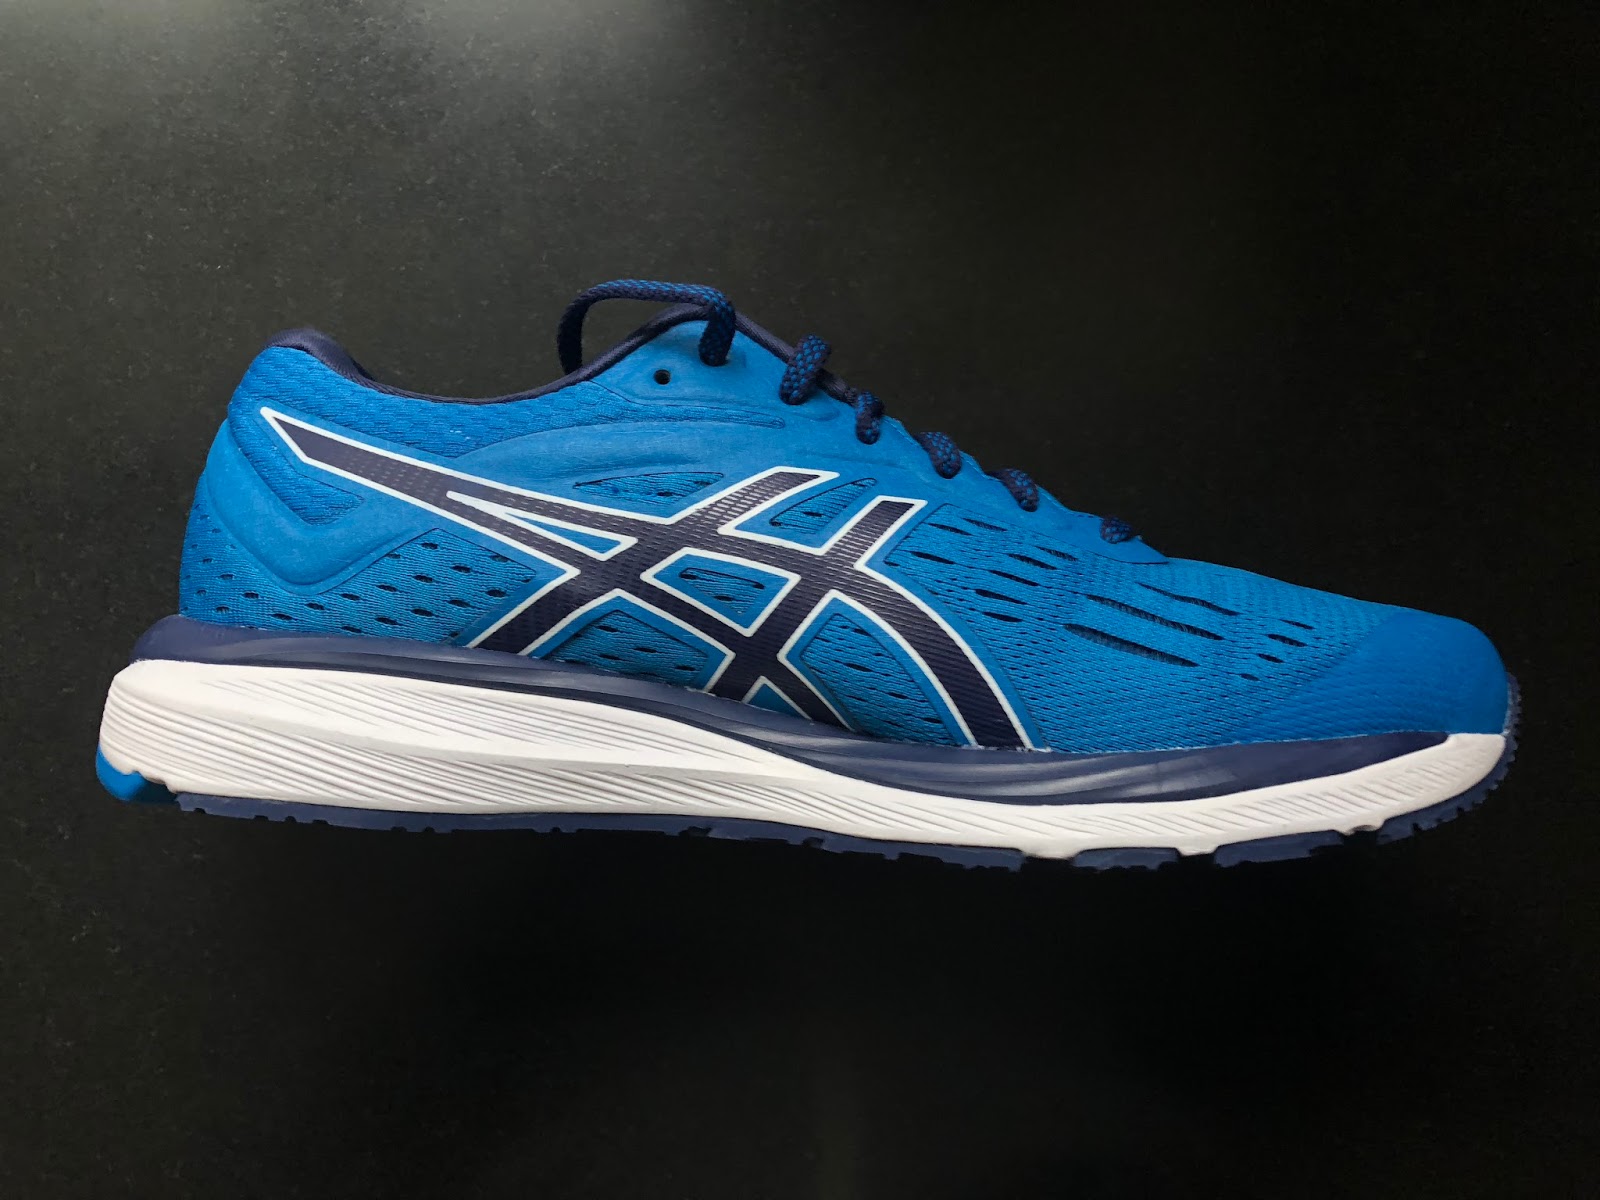 Trail Run: Gel 20 Initial Review: Solid Smooth Daily Trainer